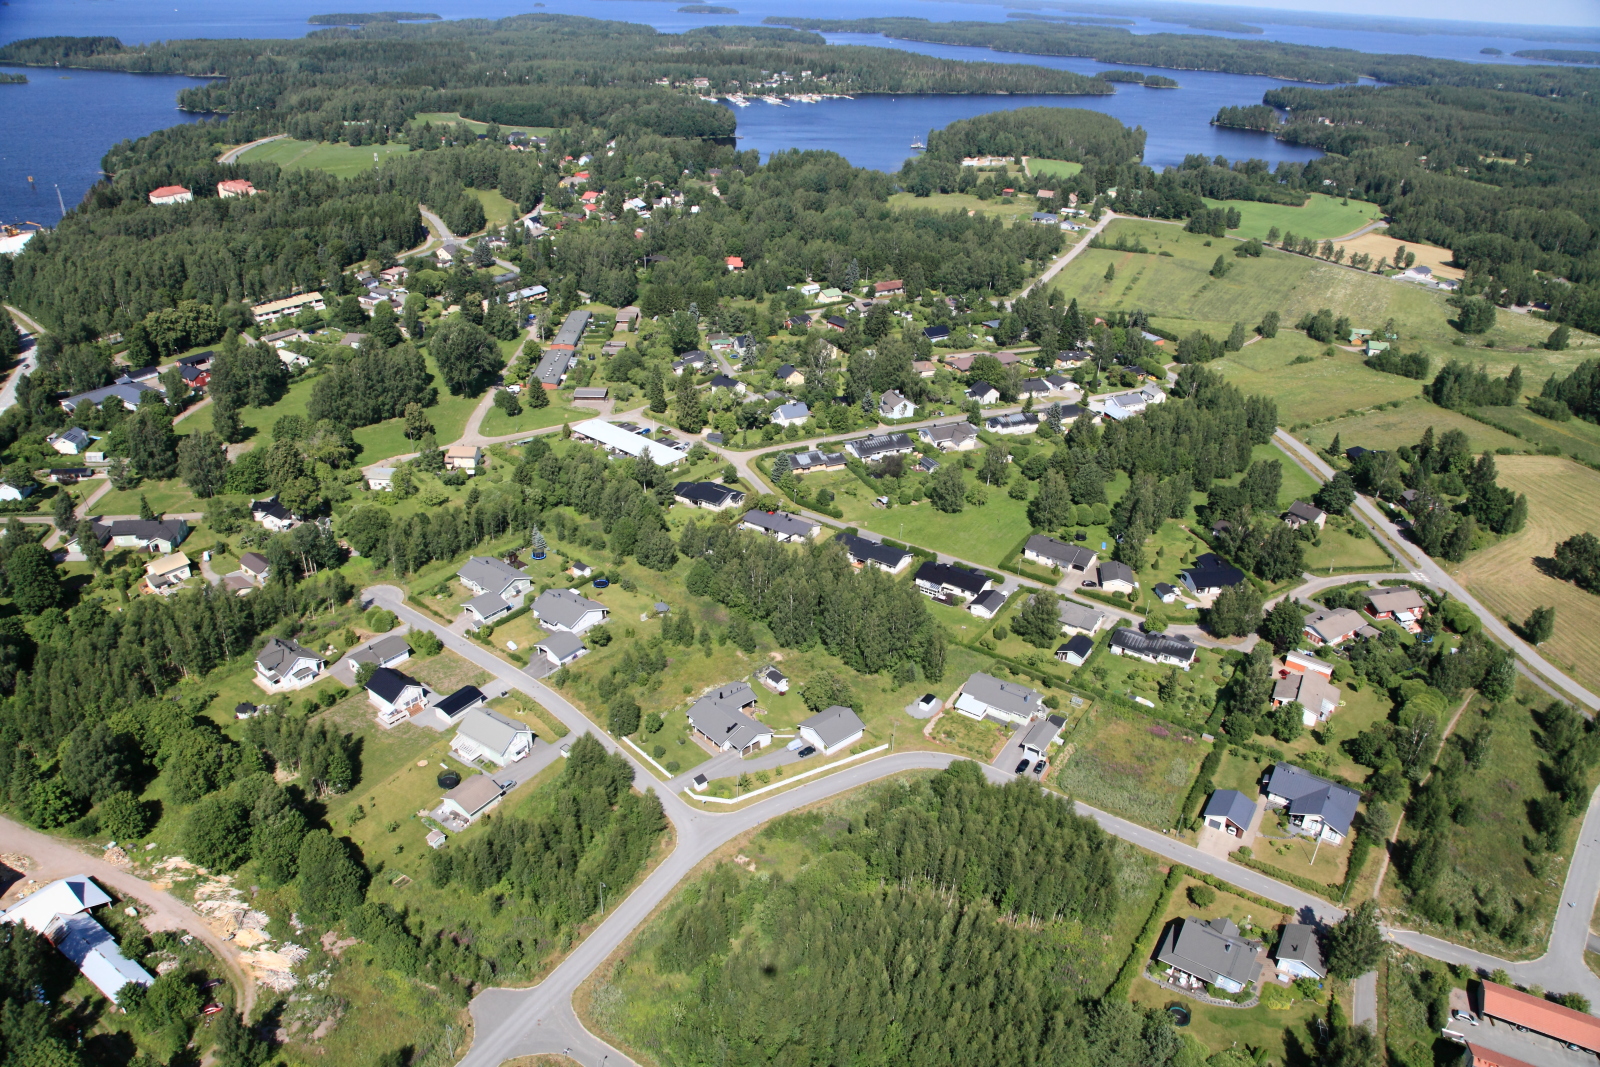 Aerial view of residential area.